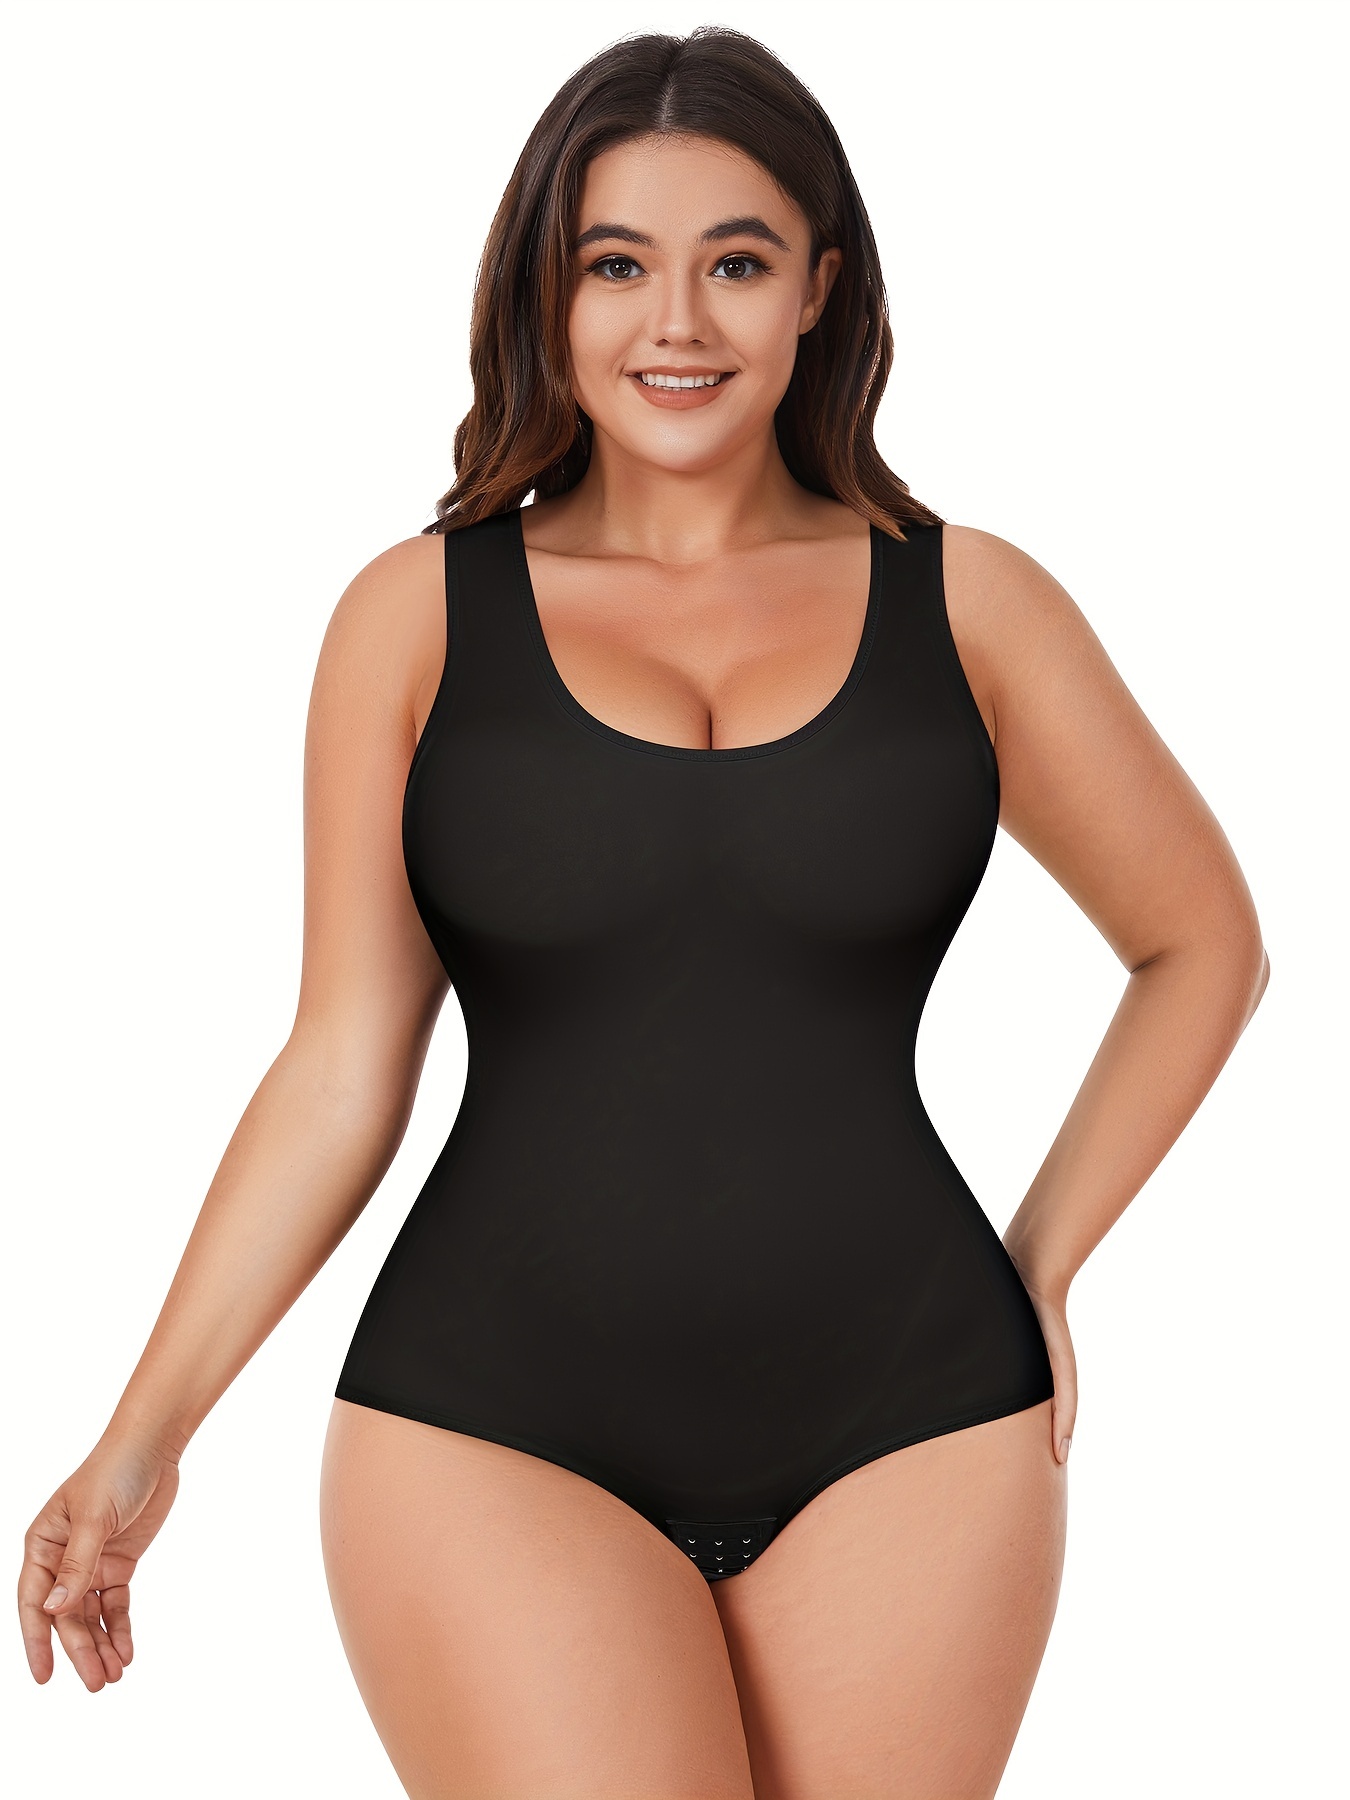 Women's Plus Size Bodysuits Backless Camisole Oversized Bodies